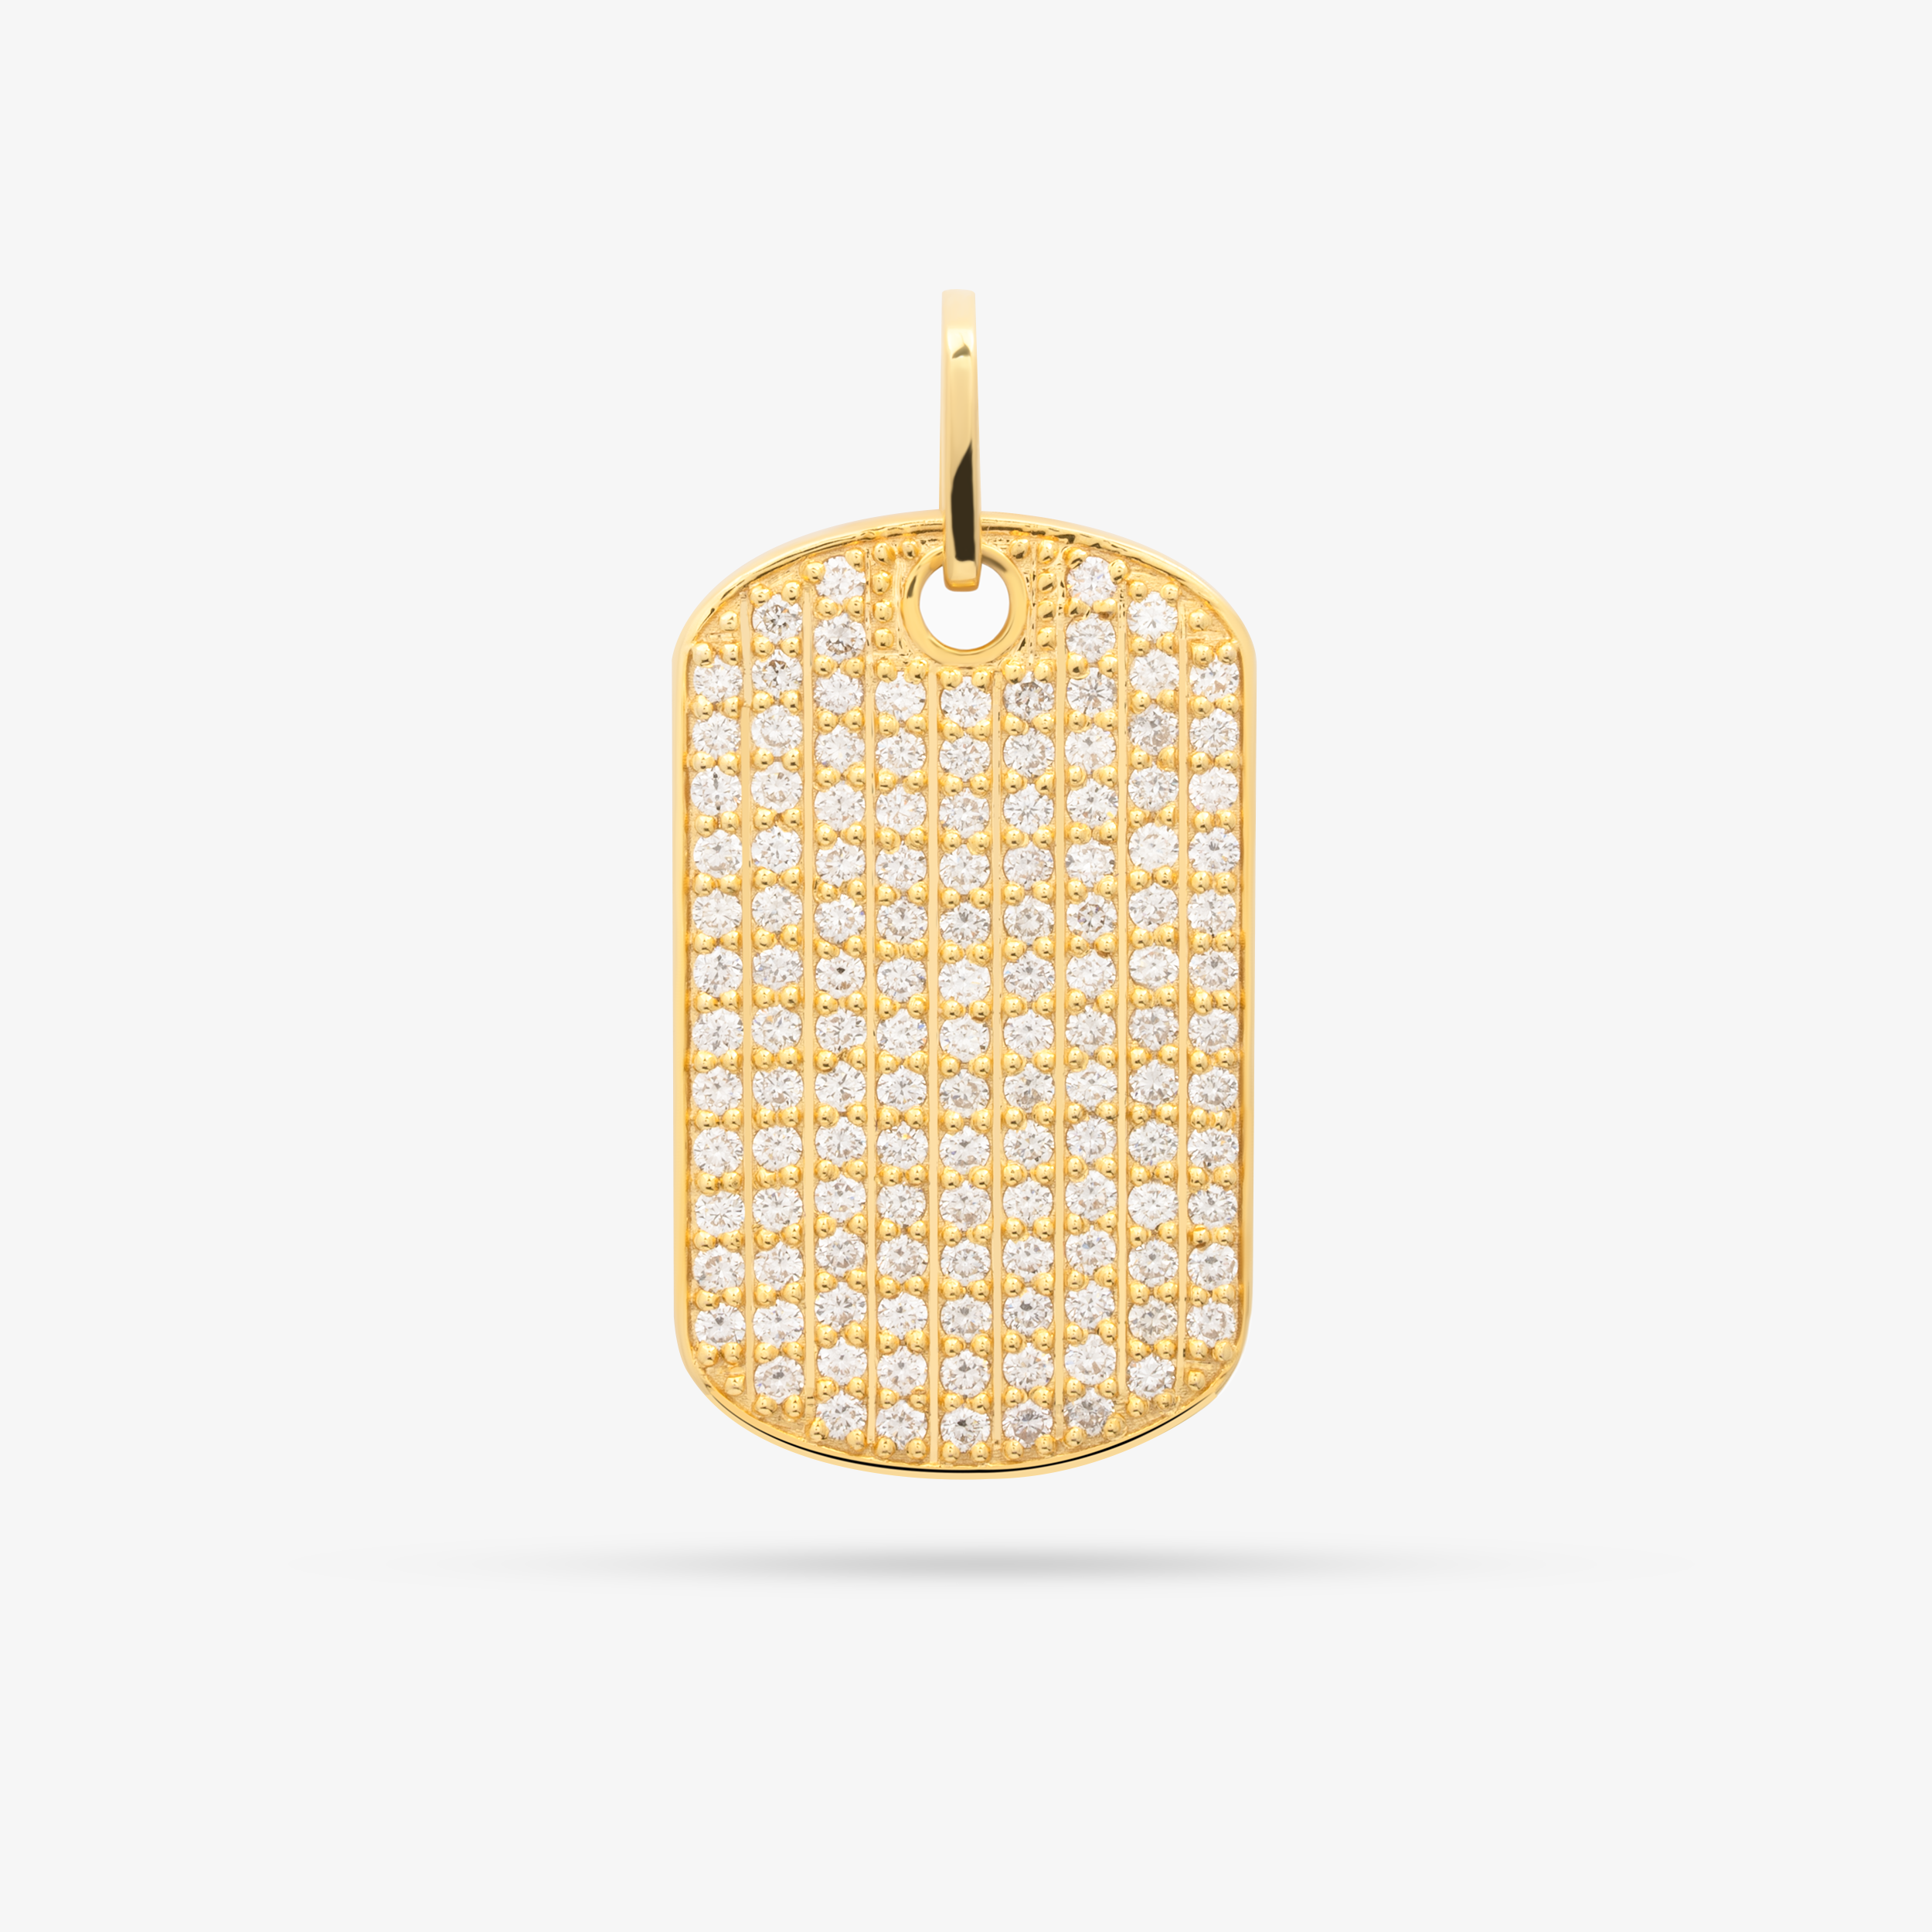 Tag Pendant In 14K Solid Yellow Gold With Diamonds